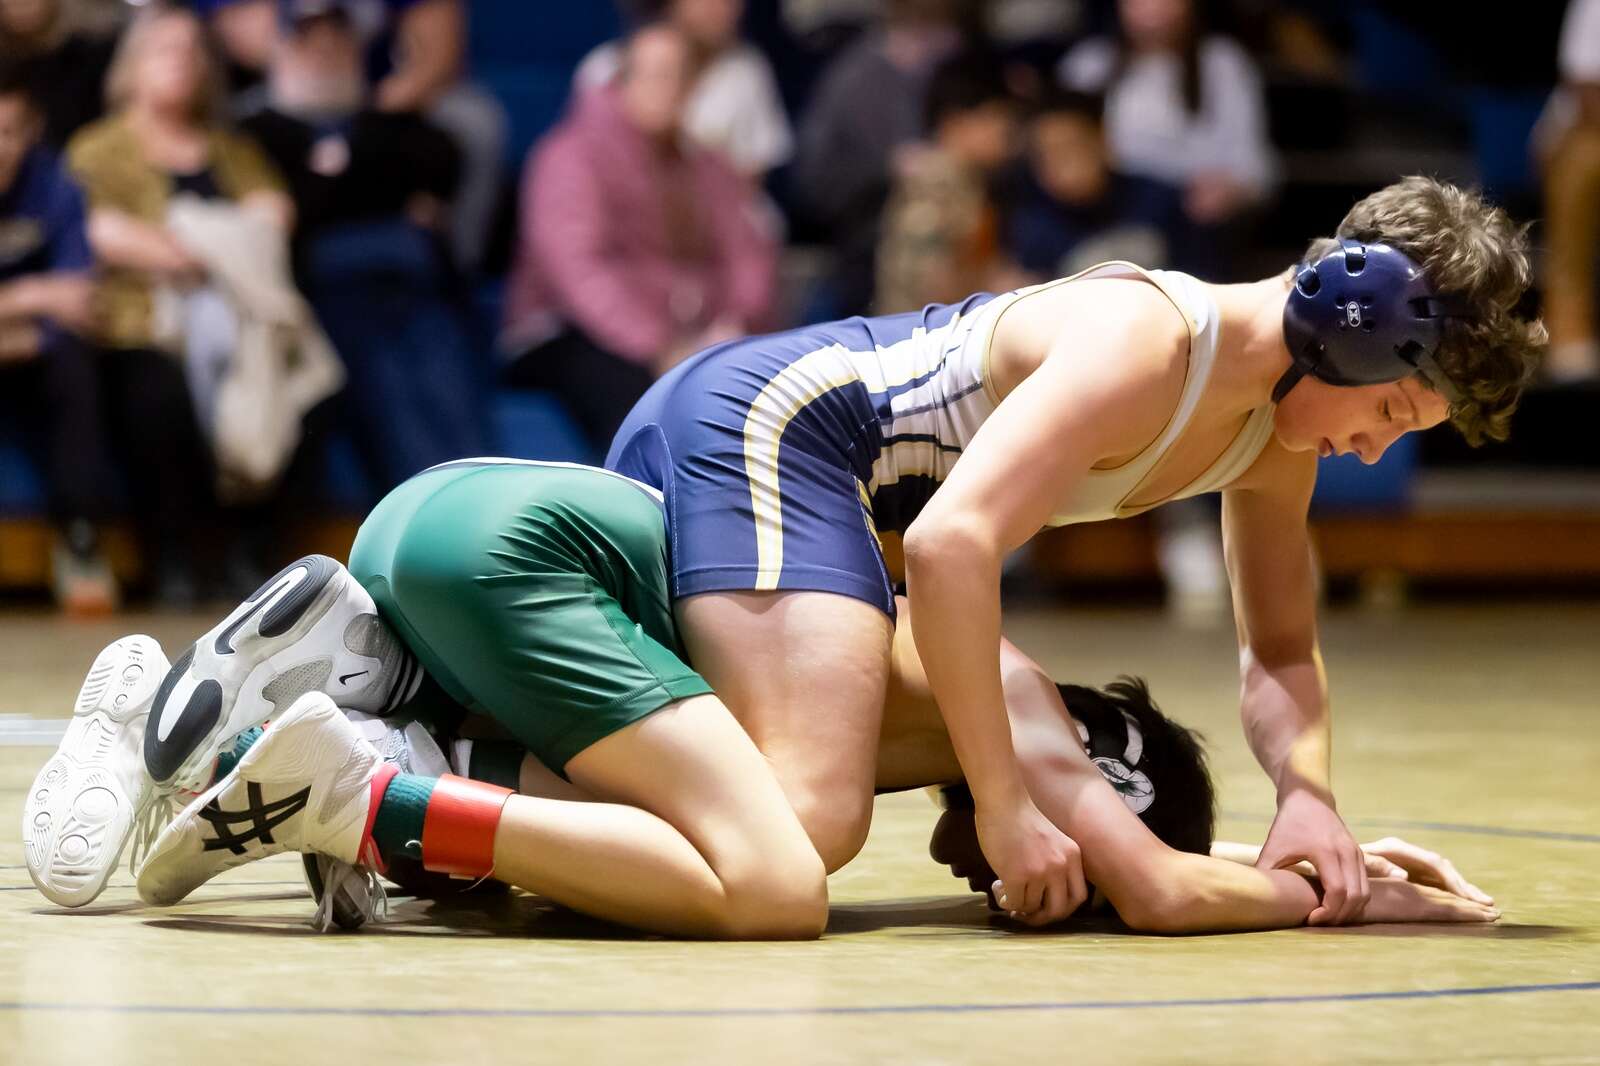 Butler’s Nick Savannah gains control over Pine-Richland’s Aiden Rohaly